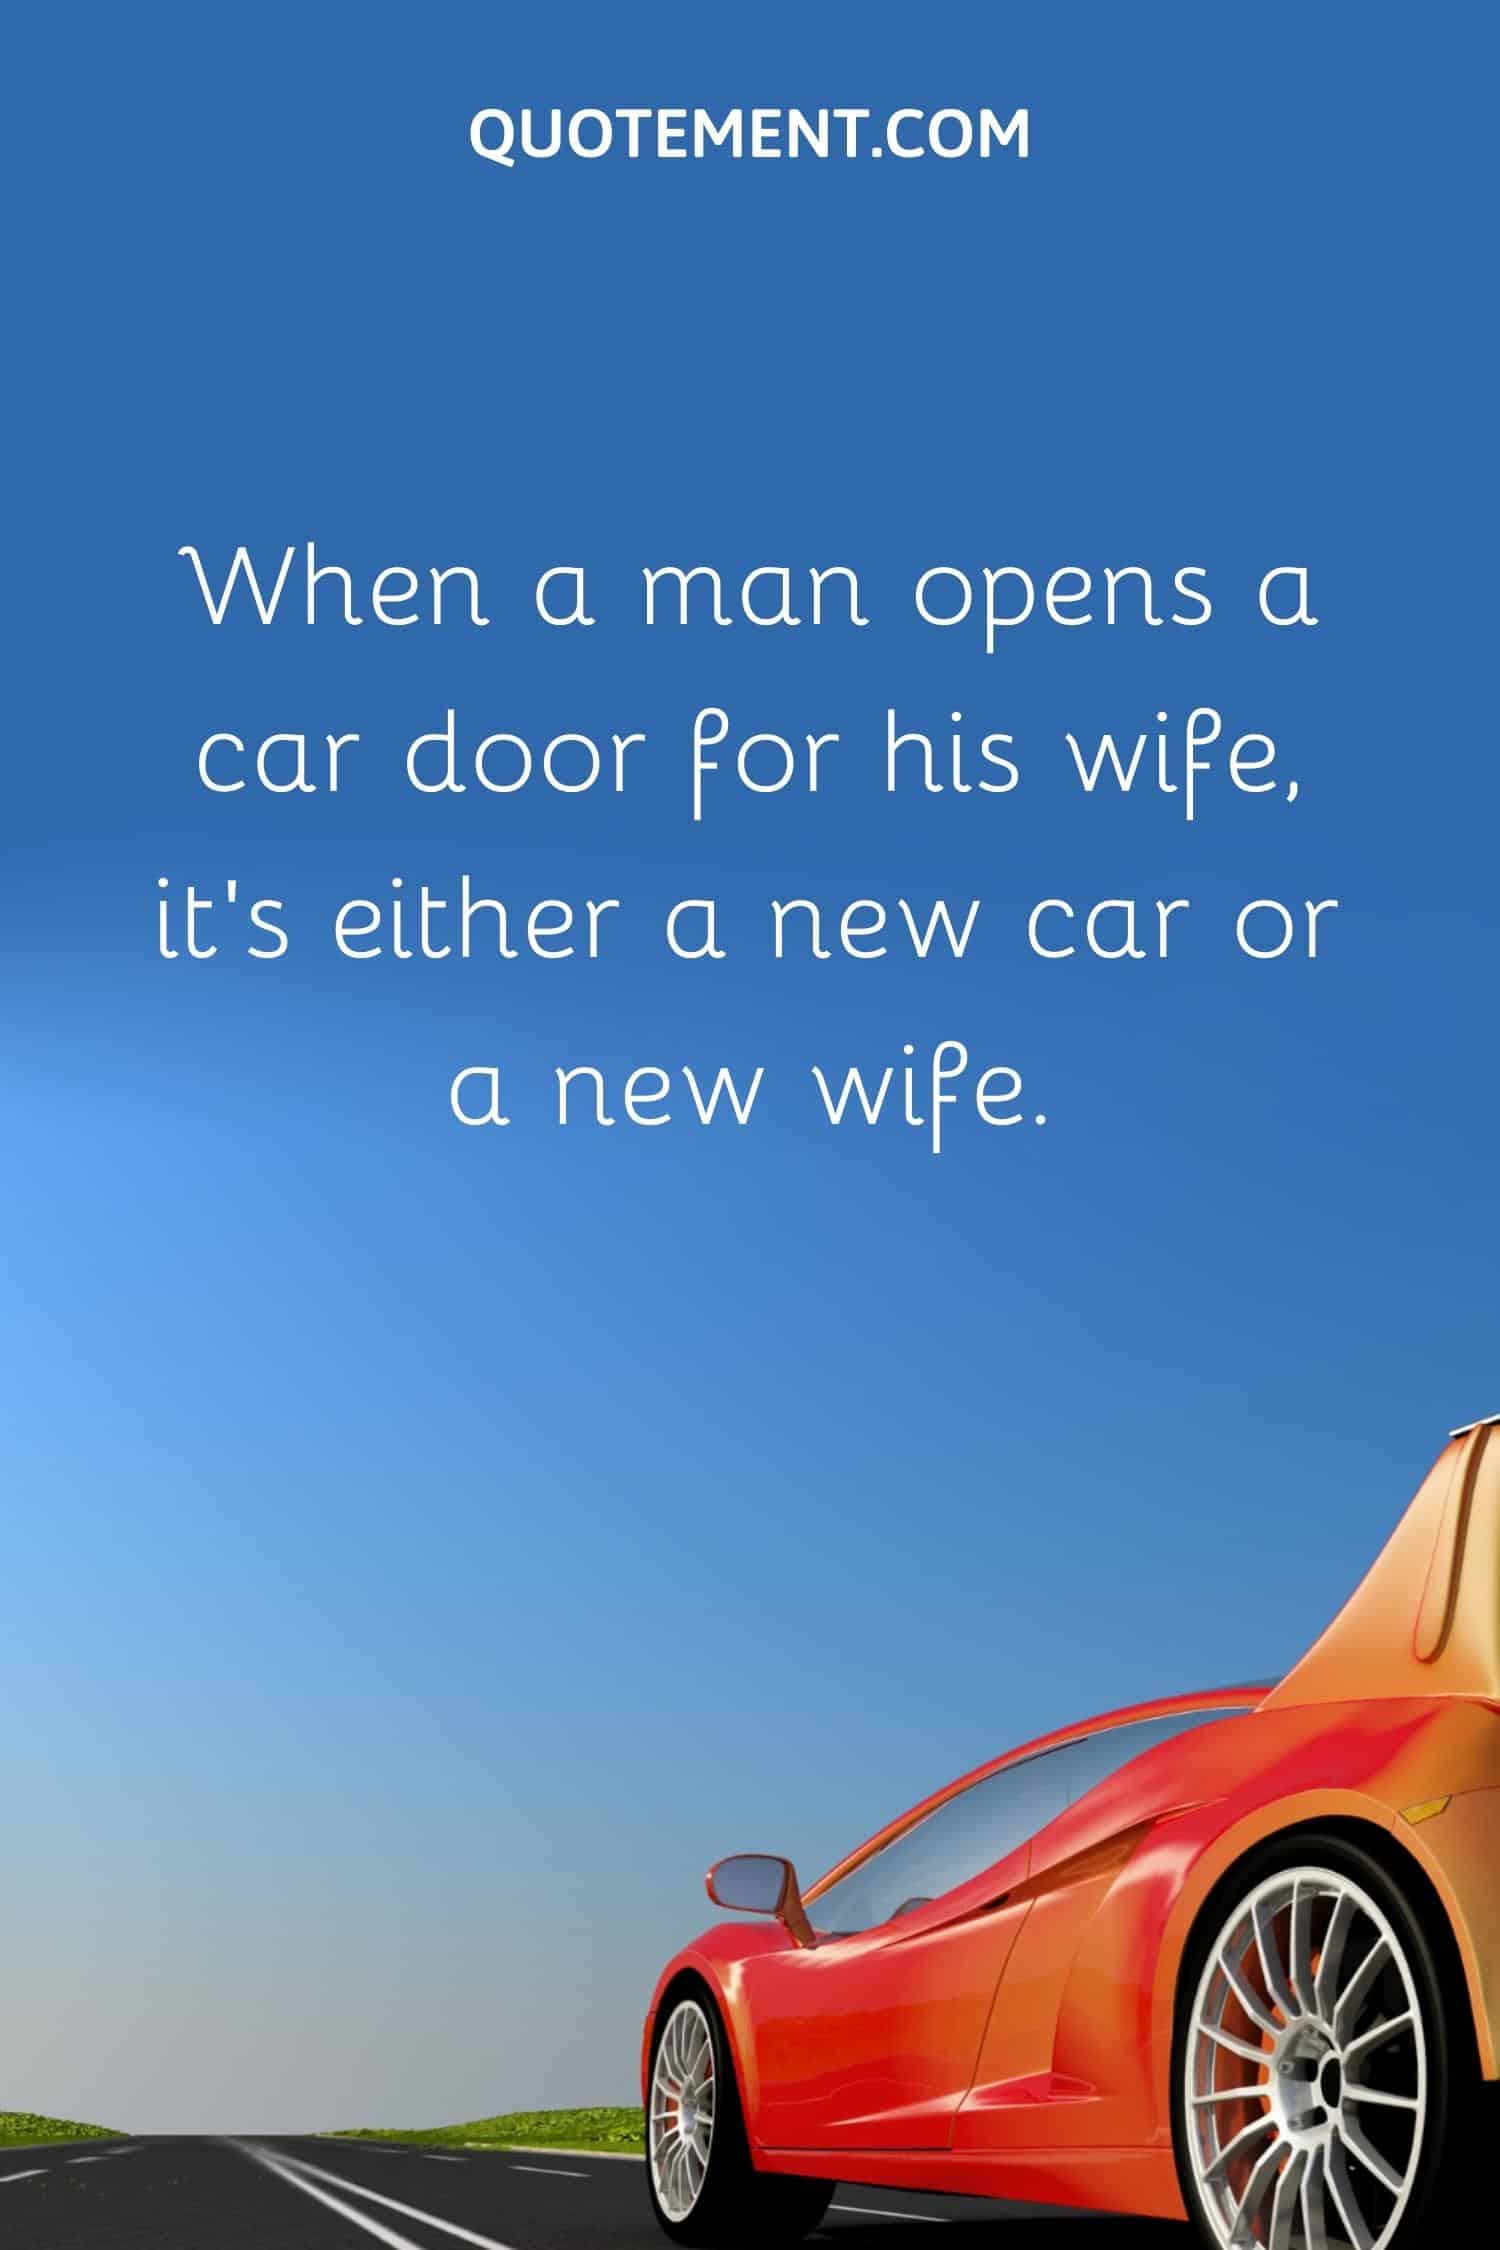 When a man opens a car door for his wife, it’s either a new car or a new wife.